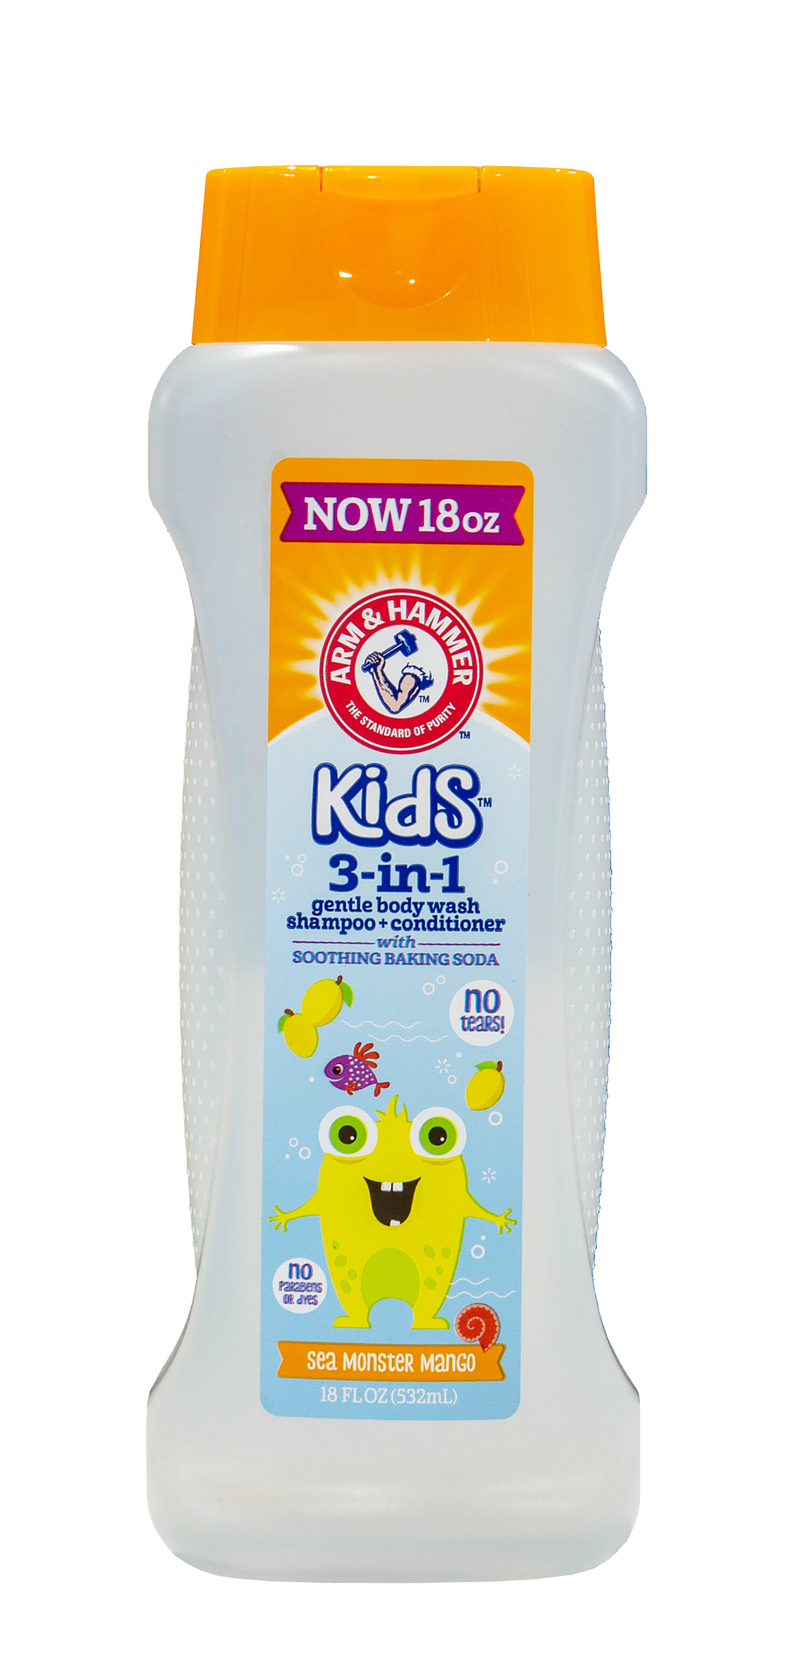 Arm & Hammer Kids 3 In 1 Gentle Body Wash Shampoo + Conditioner With Soothing Baking Soda | No Tears | 16 FLOZ